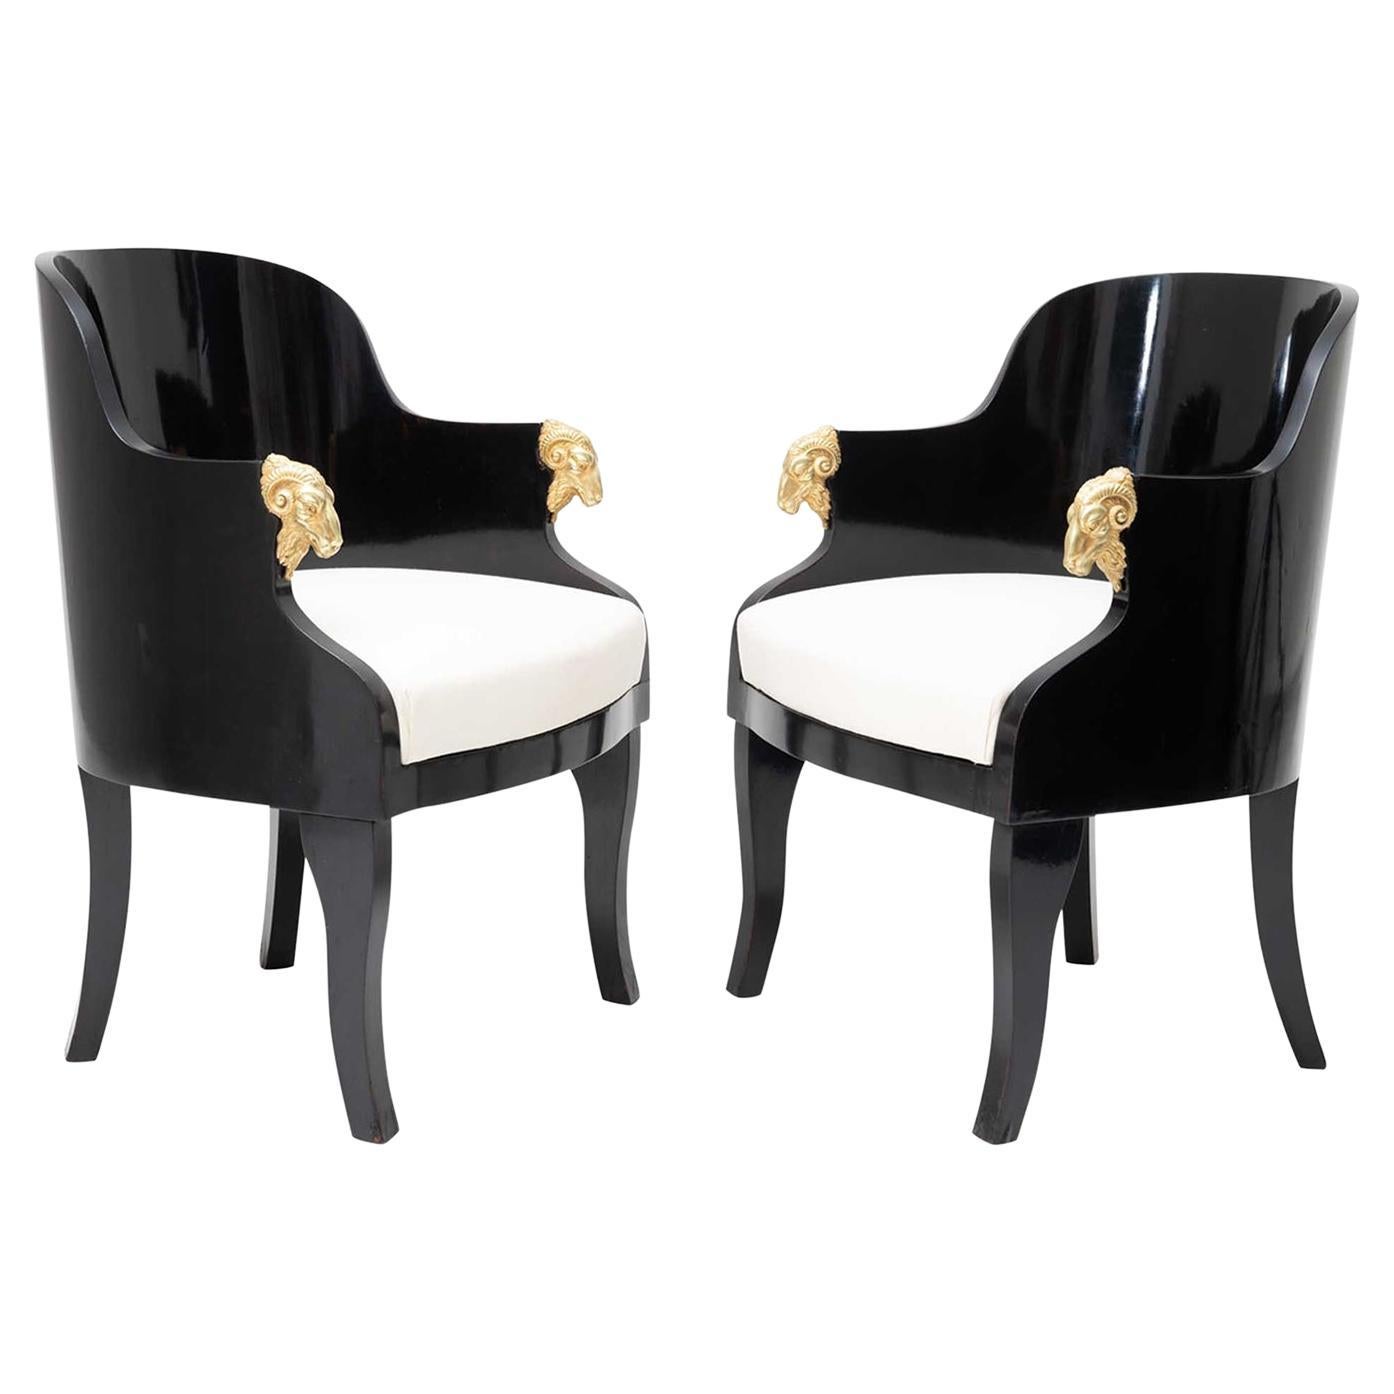 19th Century Black Baltic Pair of Lacquered Birch Armchairs, Antique Side Chairs For Sale